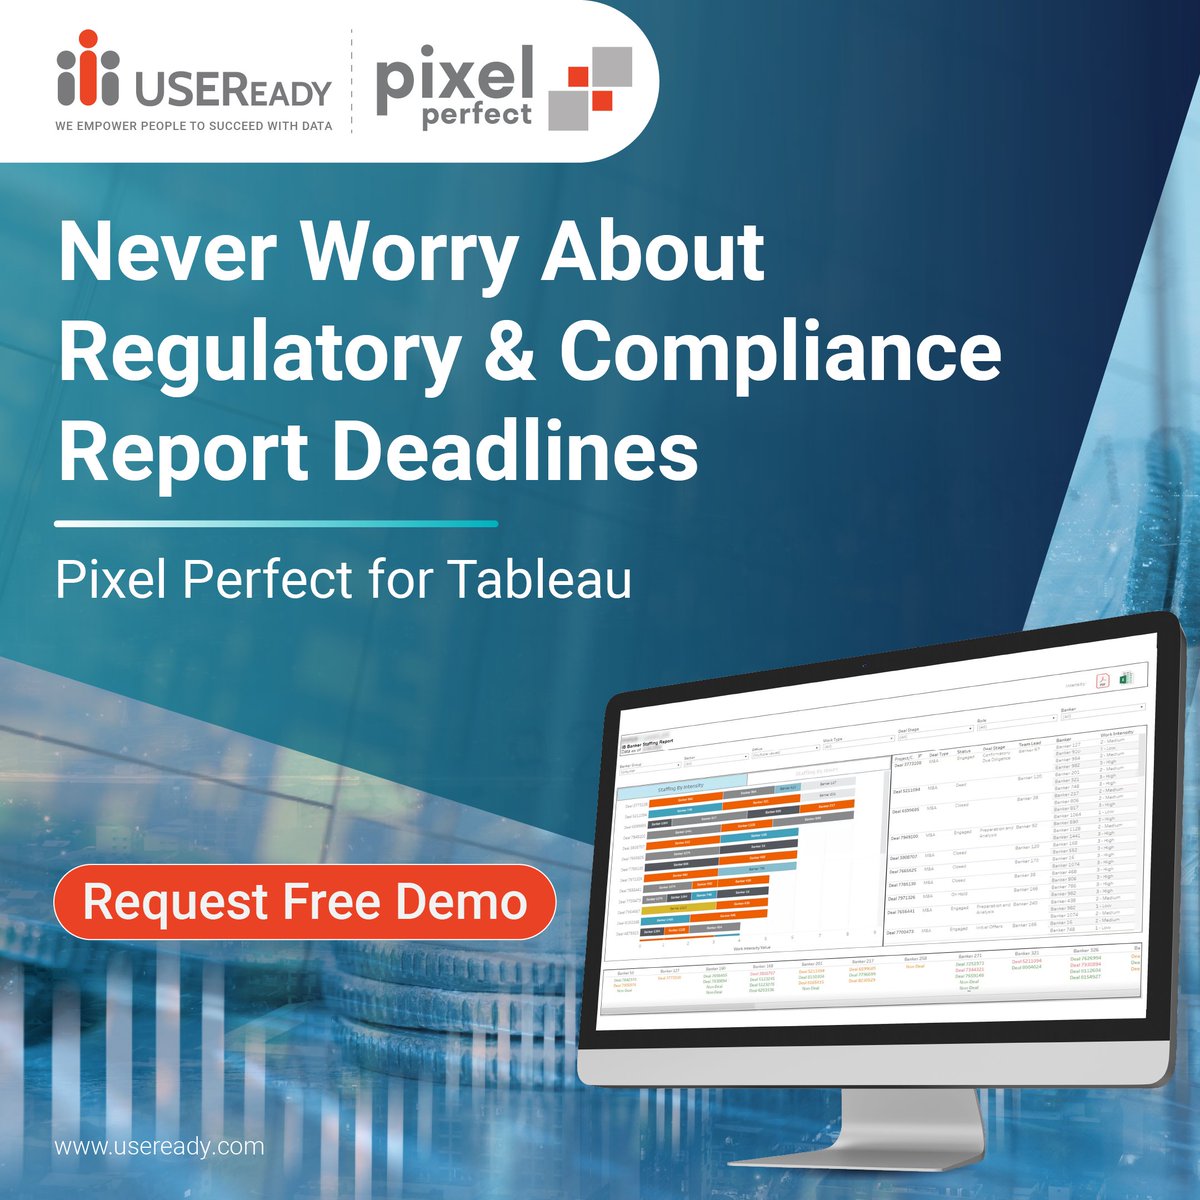 Pixel Perfect empowers world’s top banking and finance institutions by automating creation and distribution of regulatory and compliance reports at 70% lower costs.–  hubs.ly/Q02yNkJJ0
#PixelPerfect #Reporting #Banking #Finannce #Insurance #RegulatoryCompliance #PrintReady